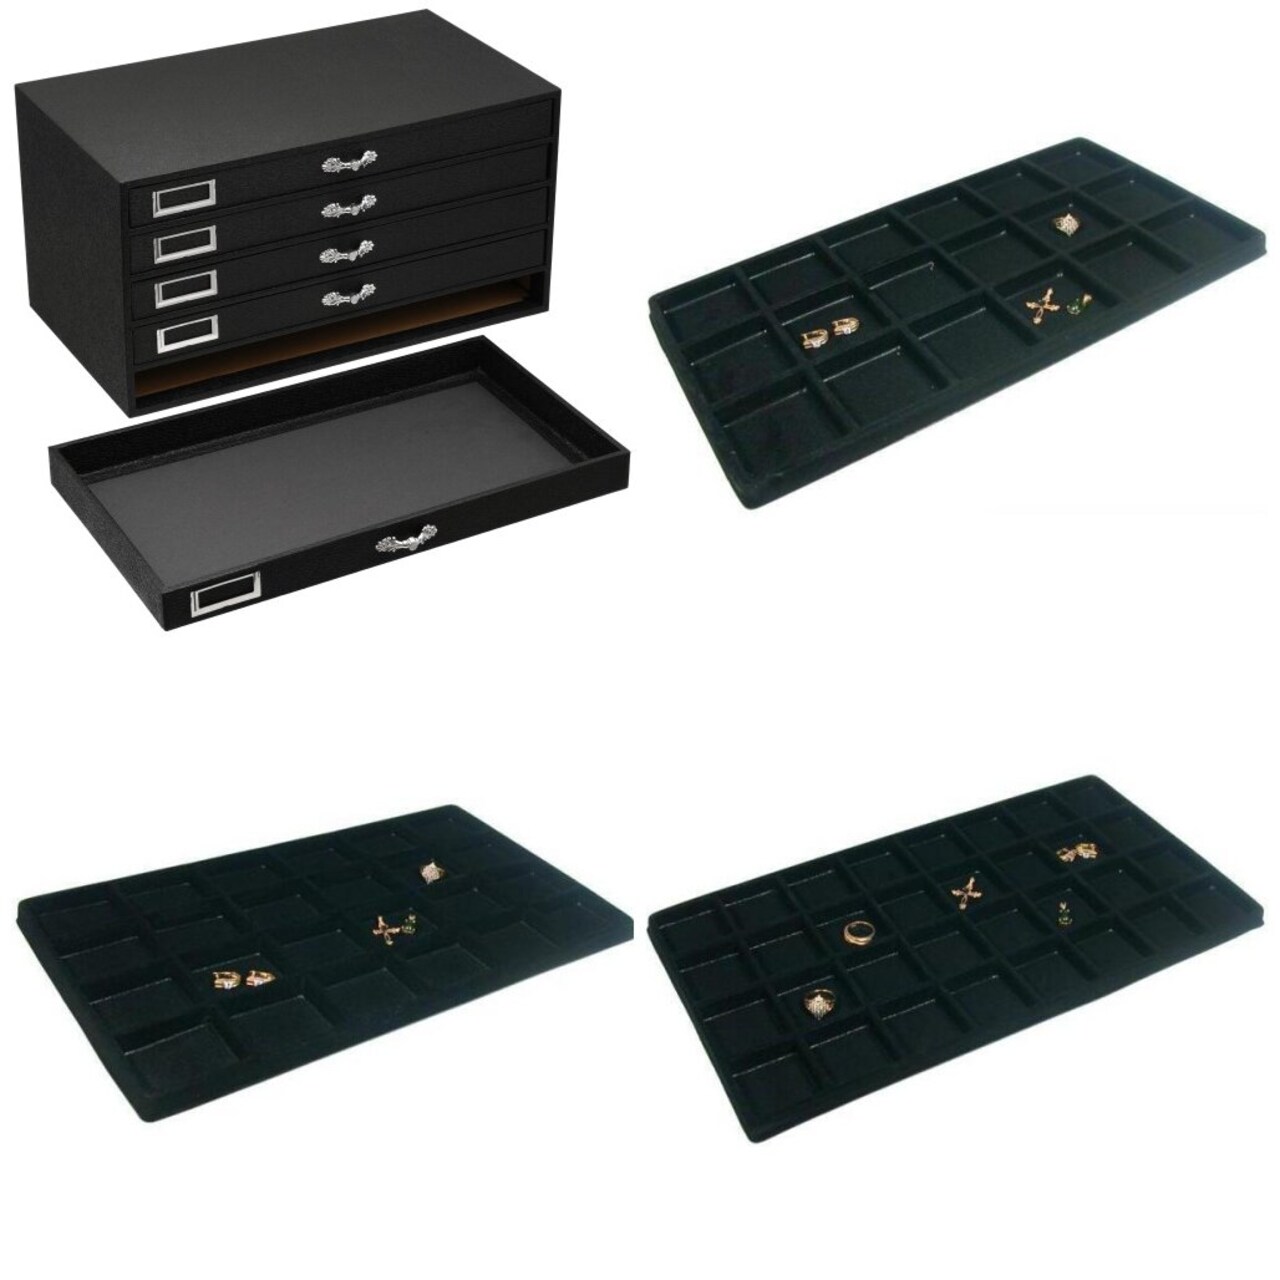 Black FindingKing 5 Drawer Jewelry Case w/ 5 Plastic Jewelry Trays -Varied Slots